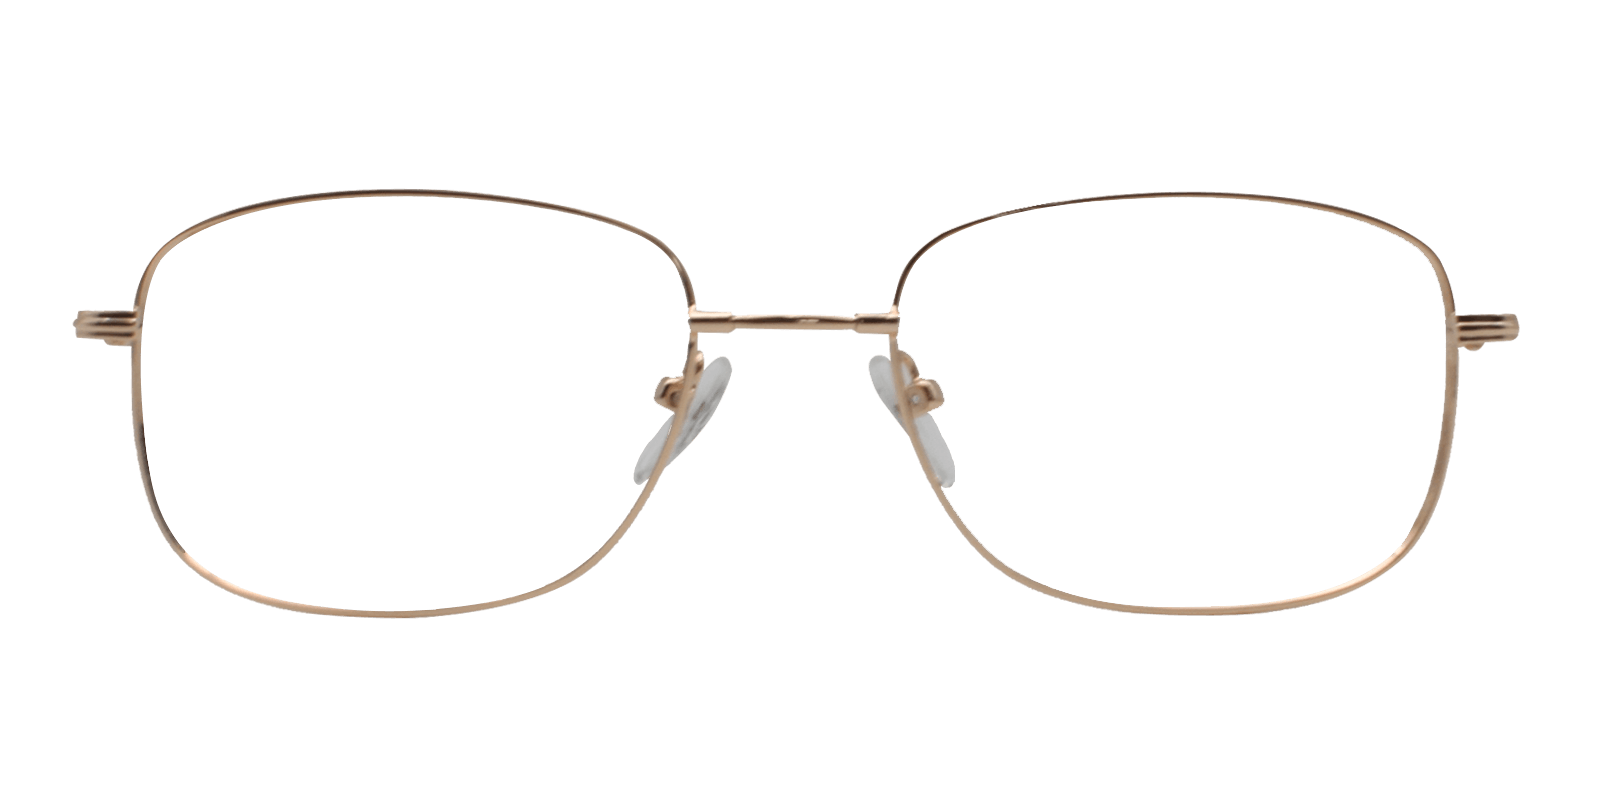 Wire Frame Glasses, Wire Rimmed Glasses Online | ABBE Glasses